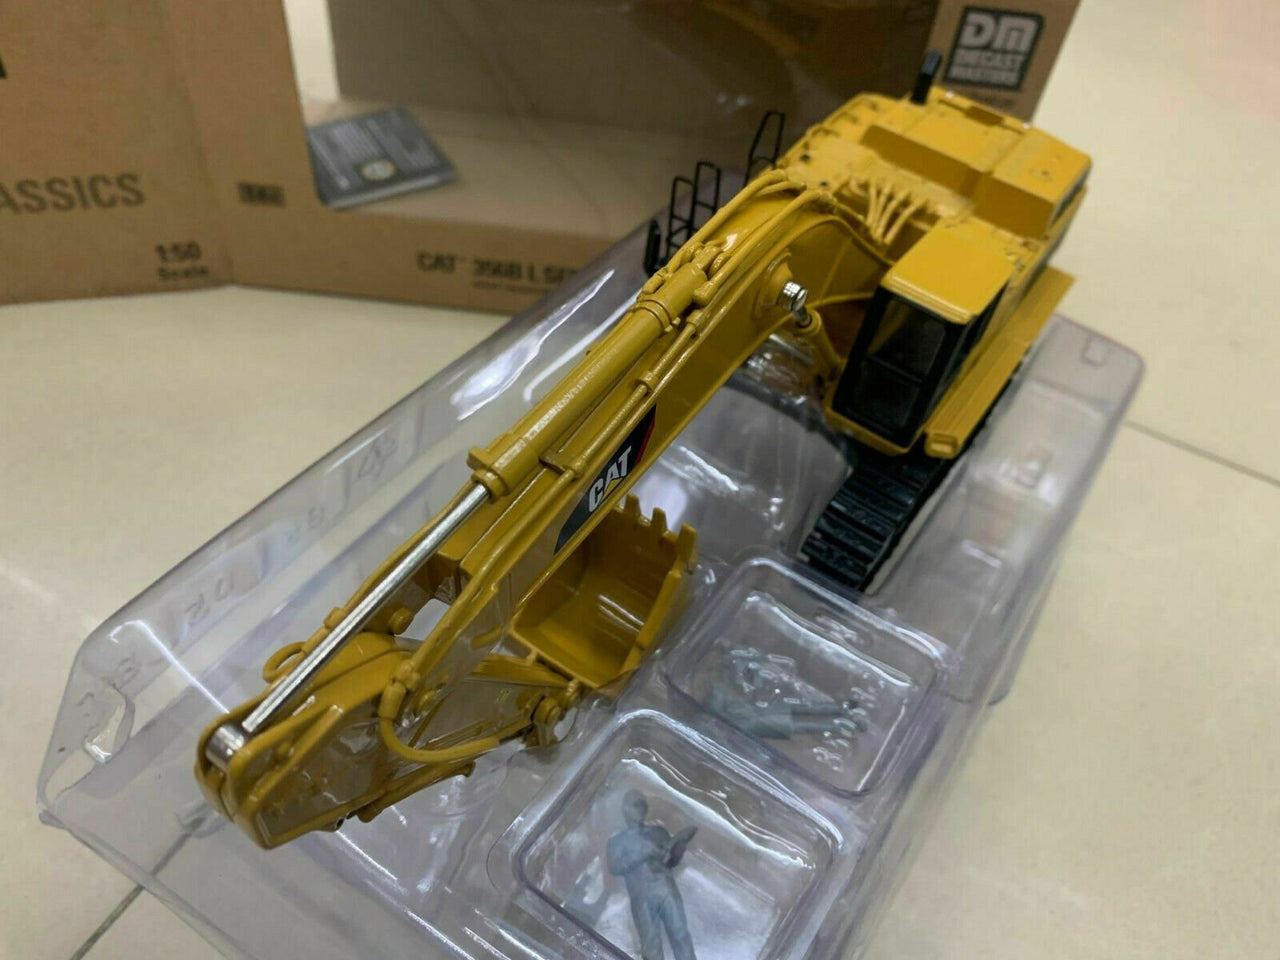 85058C Caterpillar 365BL Tracked Excavator Scale 1:50 (Discontinued Model)